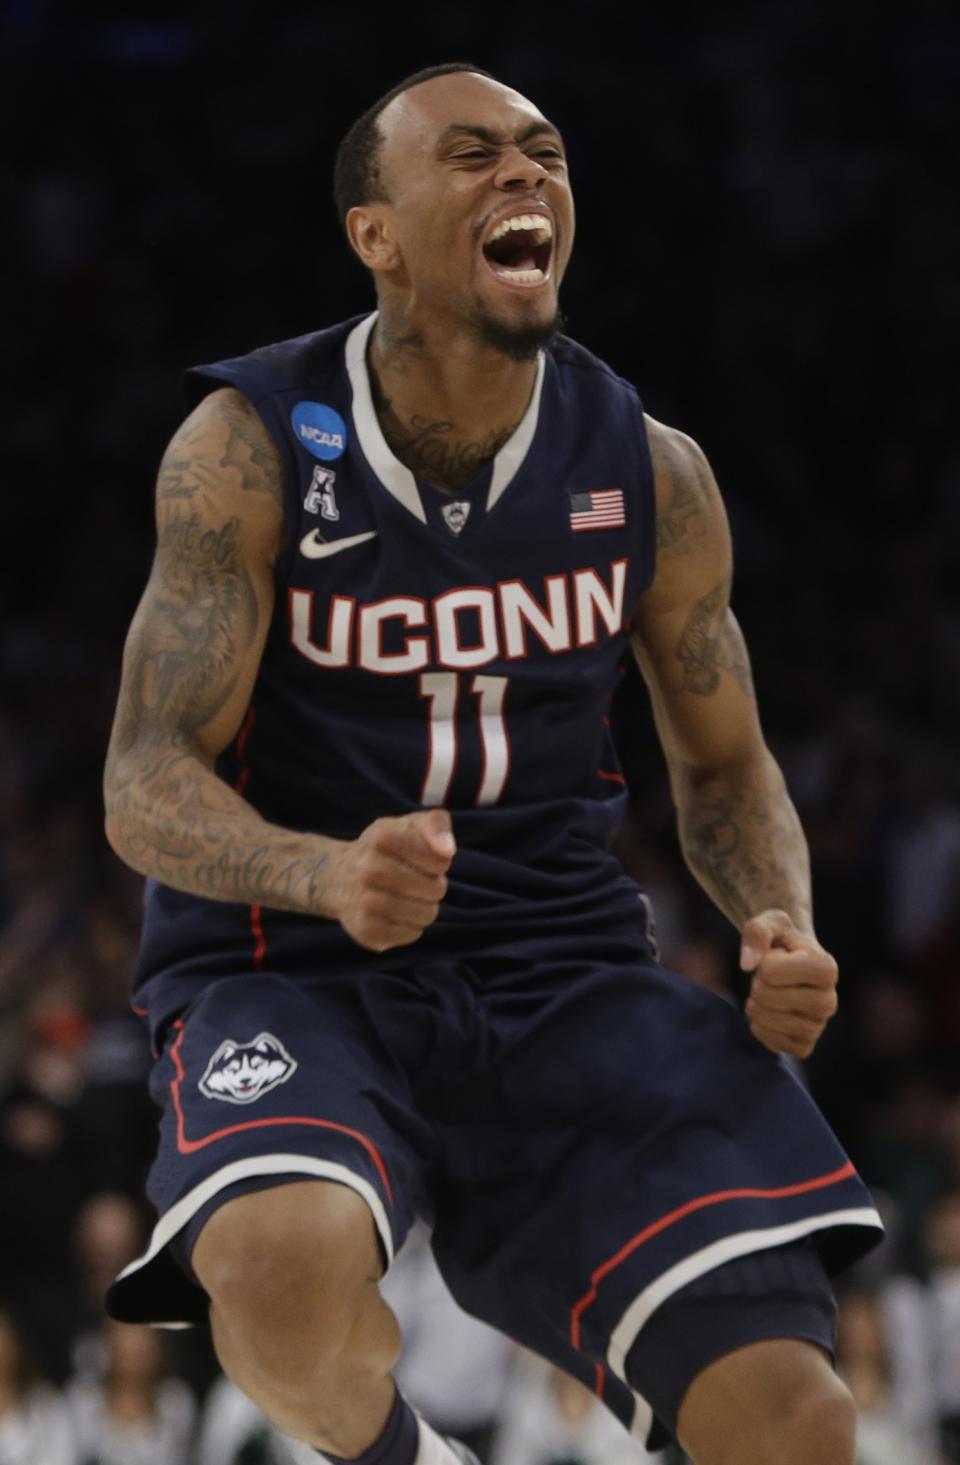 Connecticut's Ryan Boatright (11) celebrates during the second half of a regional final against Michigan State in the NCAA college basketball tournament Sunday, March 30, 2014, in New York. Connecticut won the game 60-54. (AP Photo/Frank Franklin II)